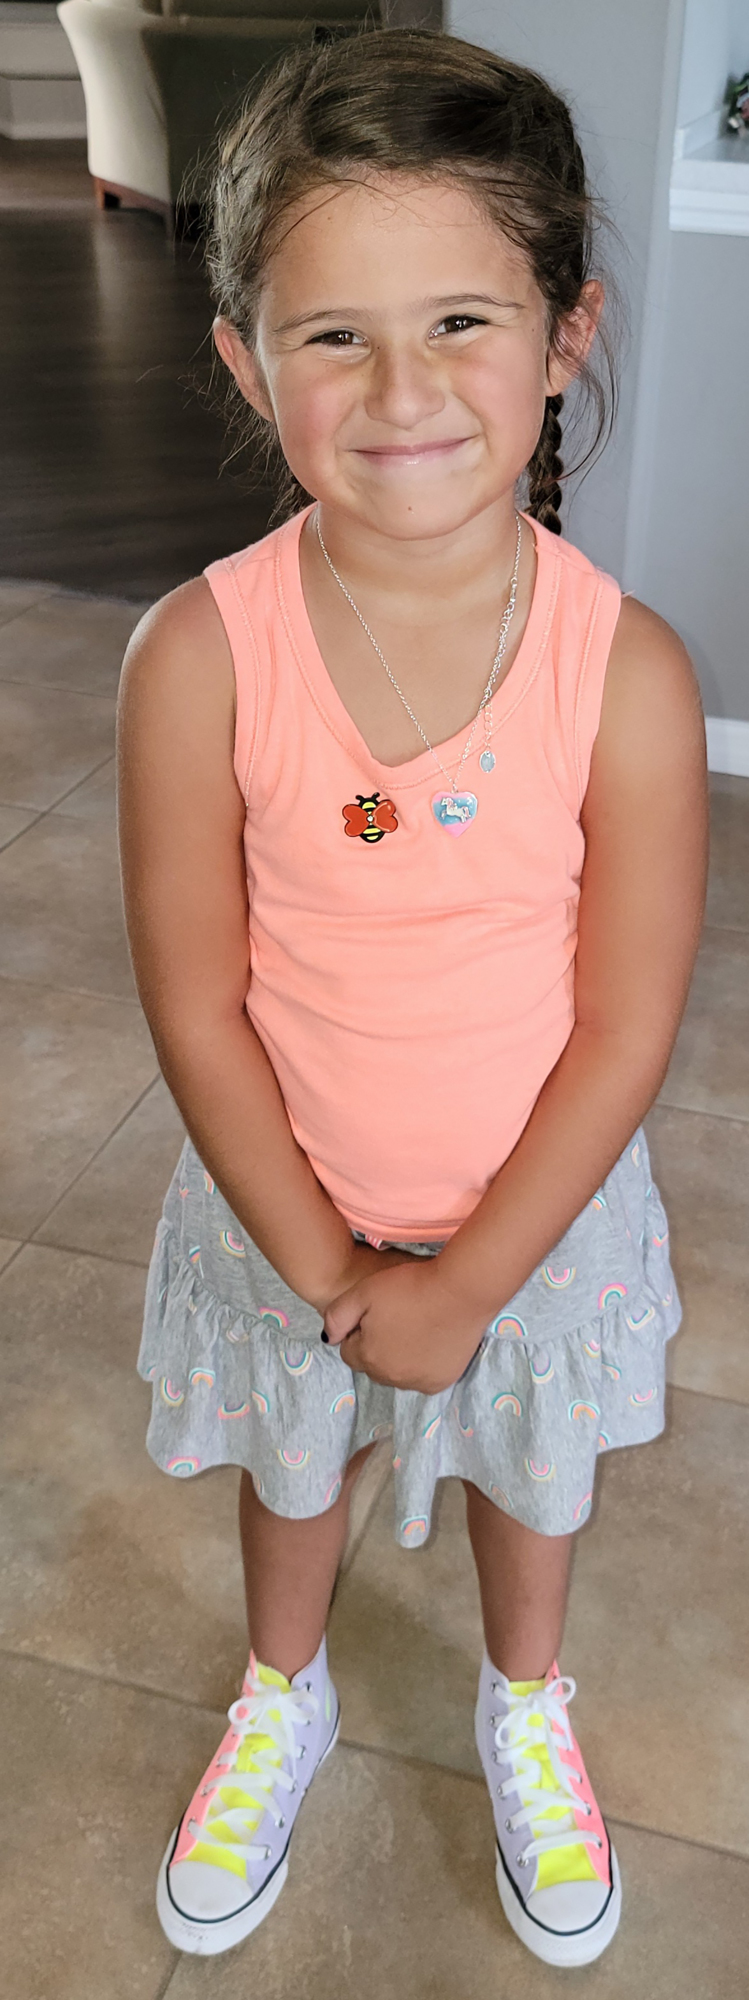 Mia Morton, who is 6, almost always wears the bee pin she and her mother, Stephanie Morton, created to ease separation anxiety. Courtesy photo.